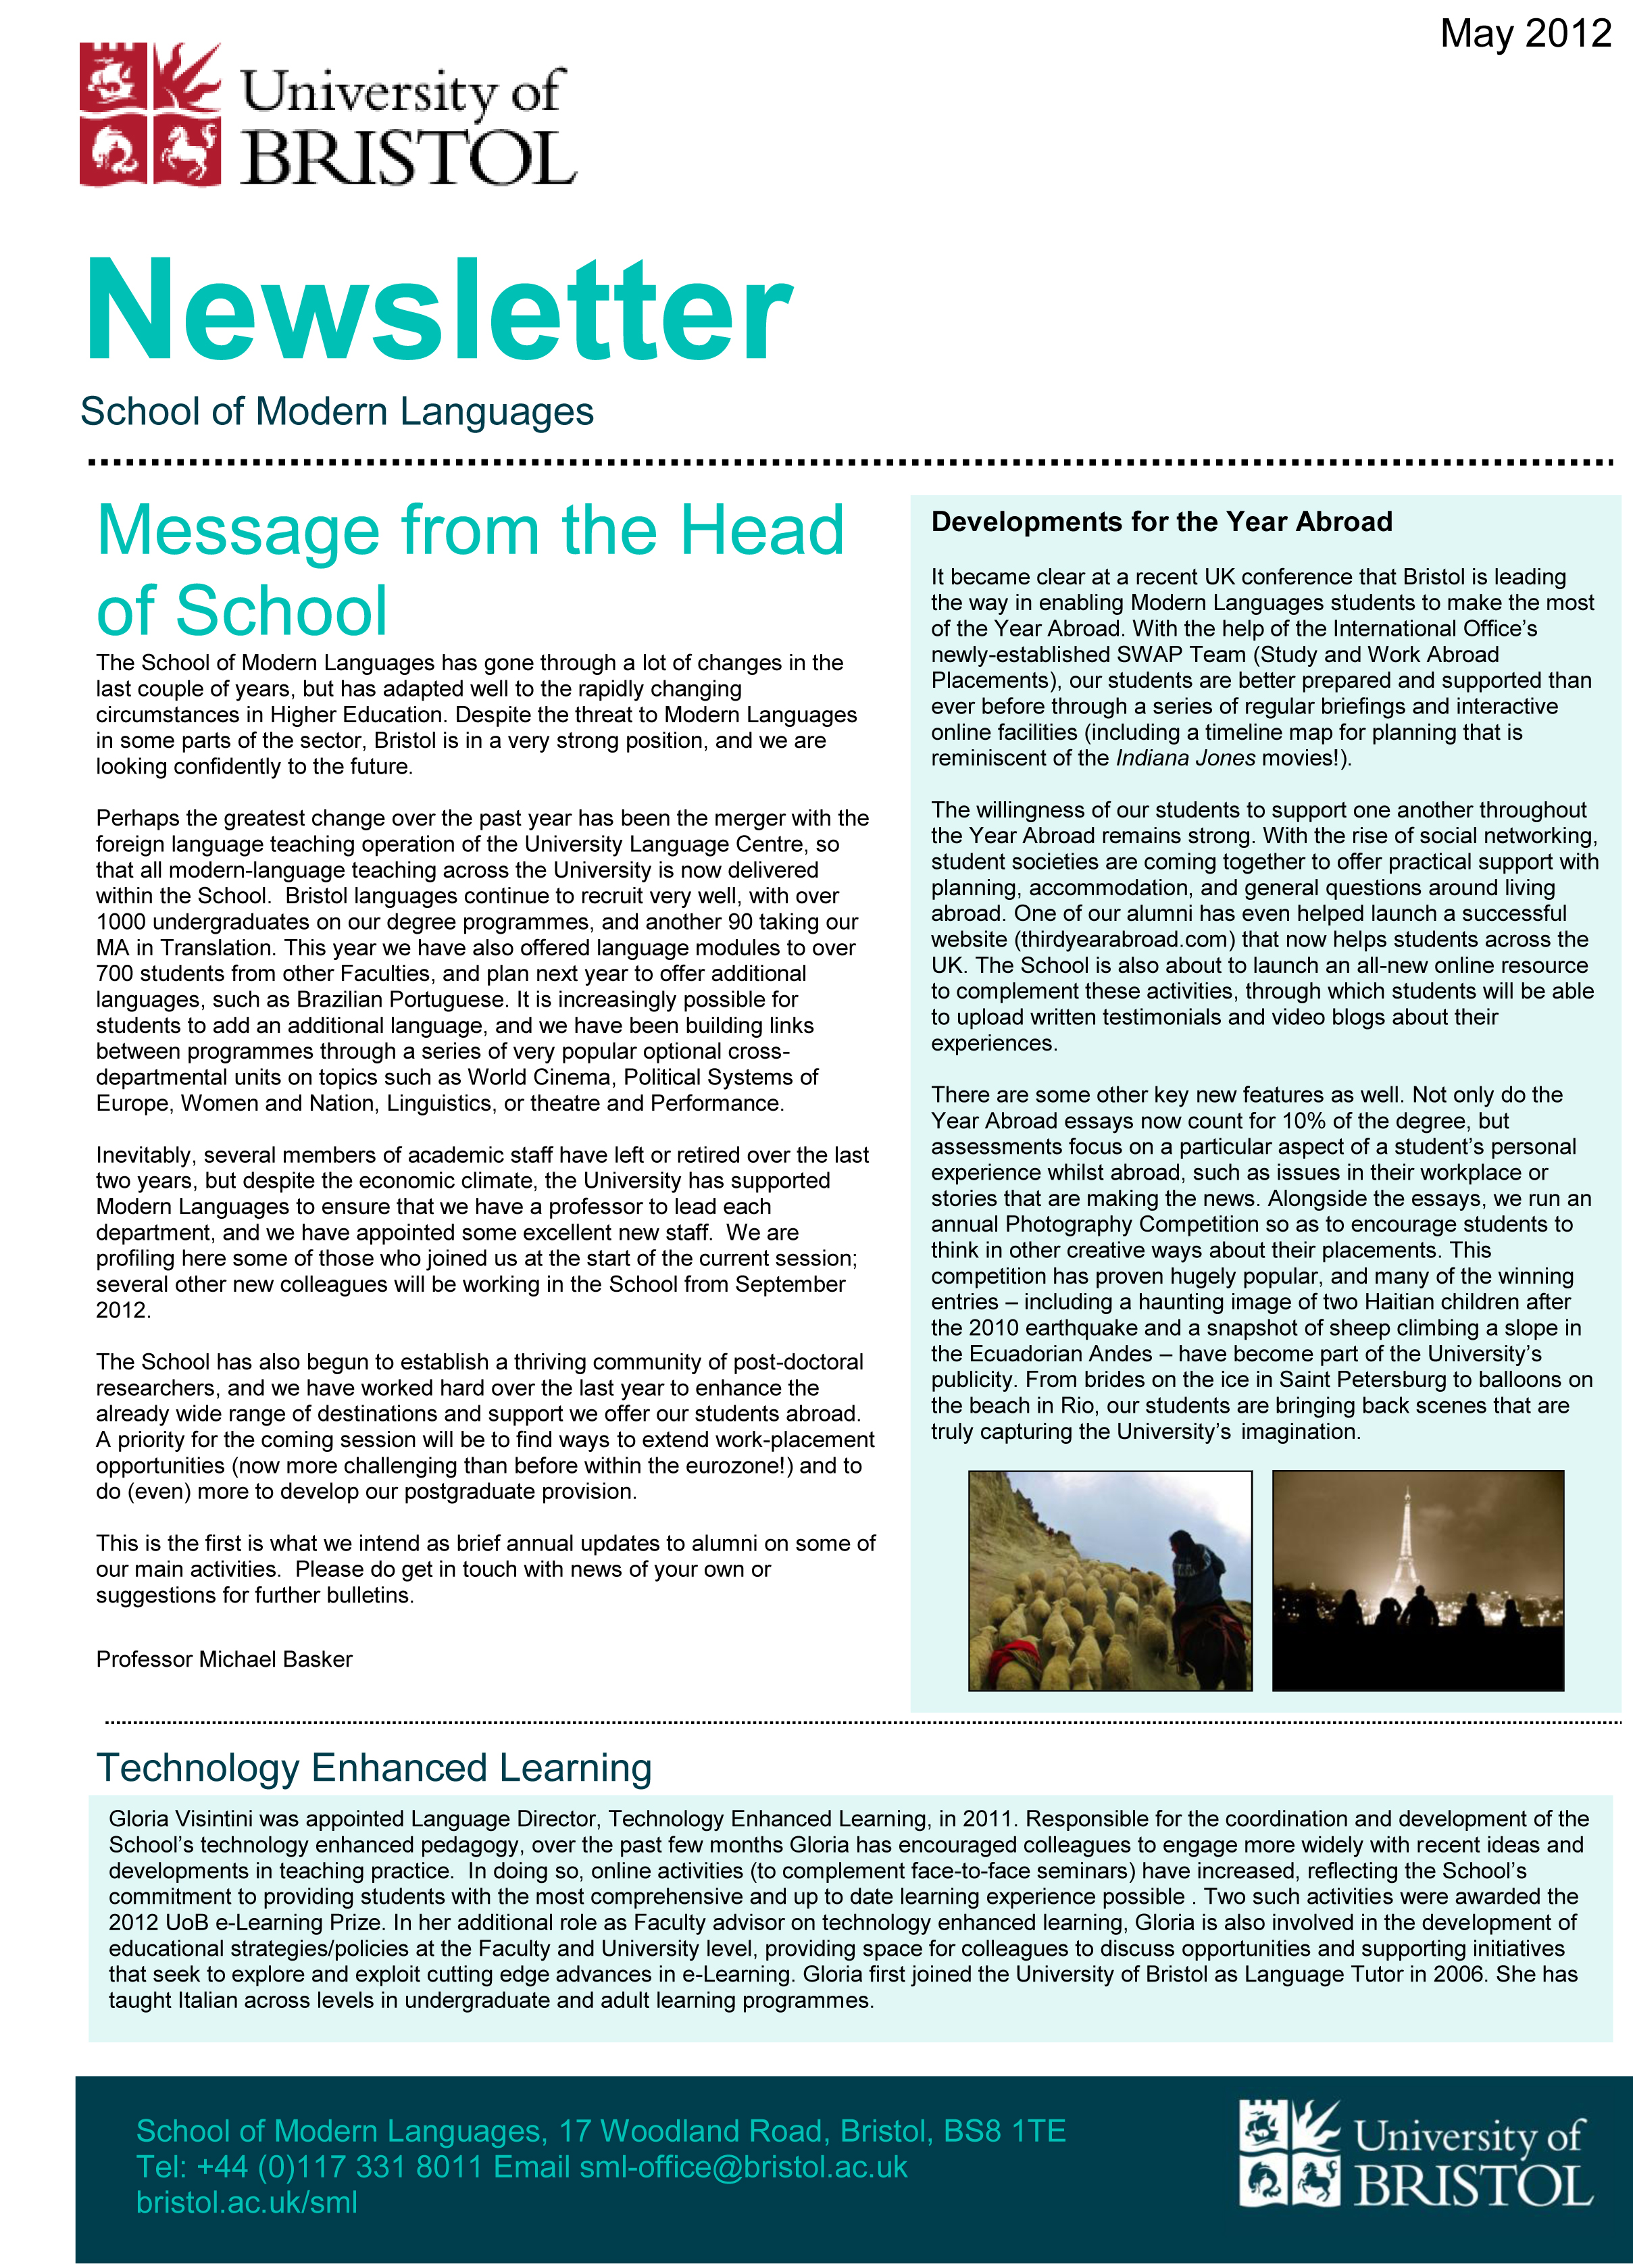 School of Modern Languages Newsletter May 2012